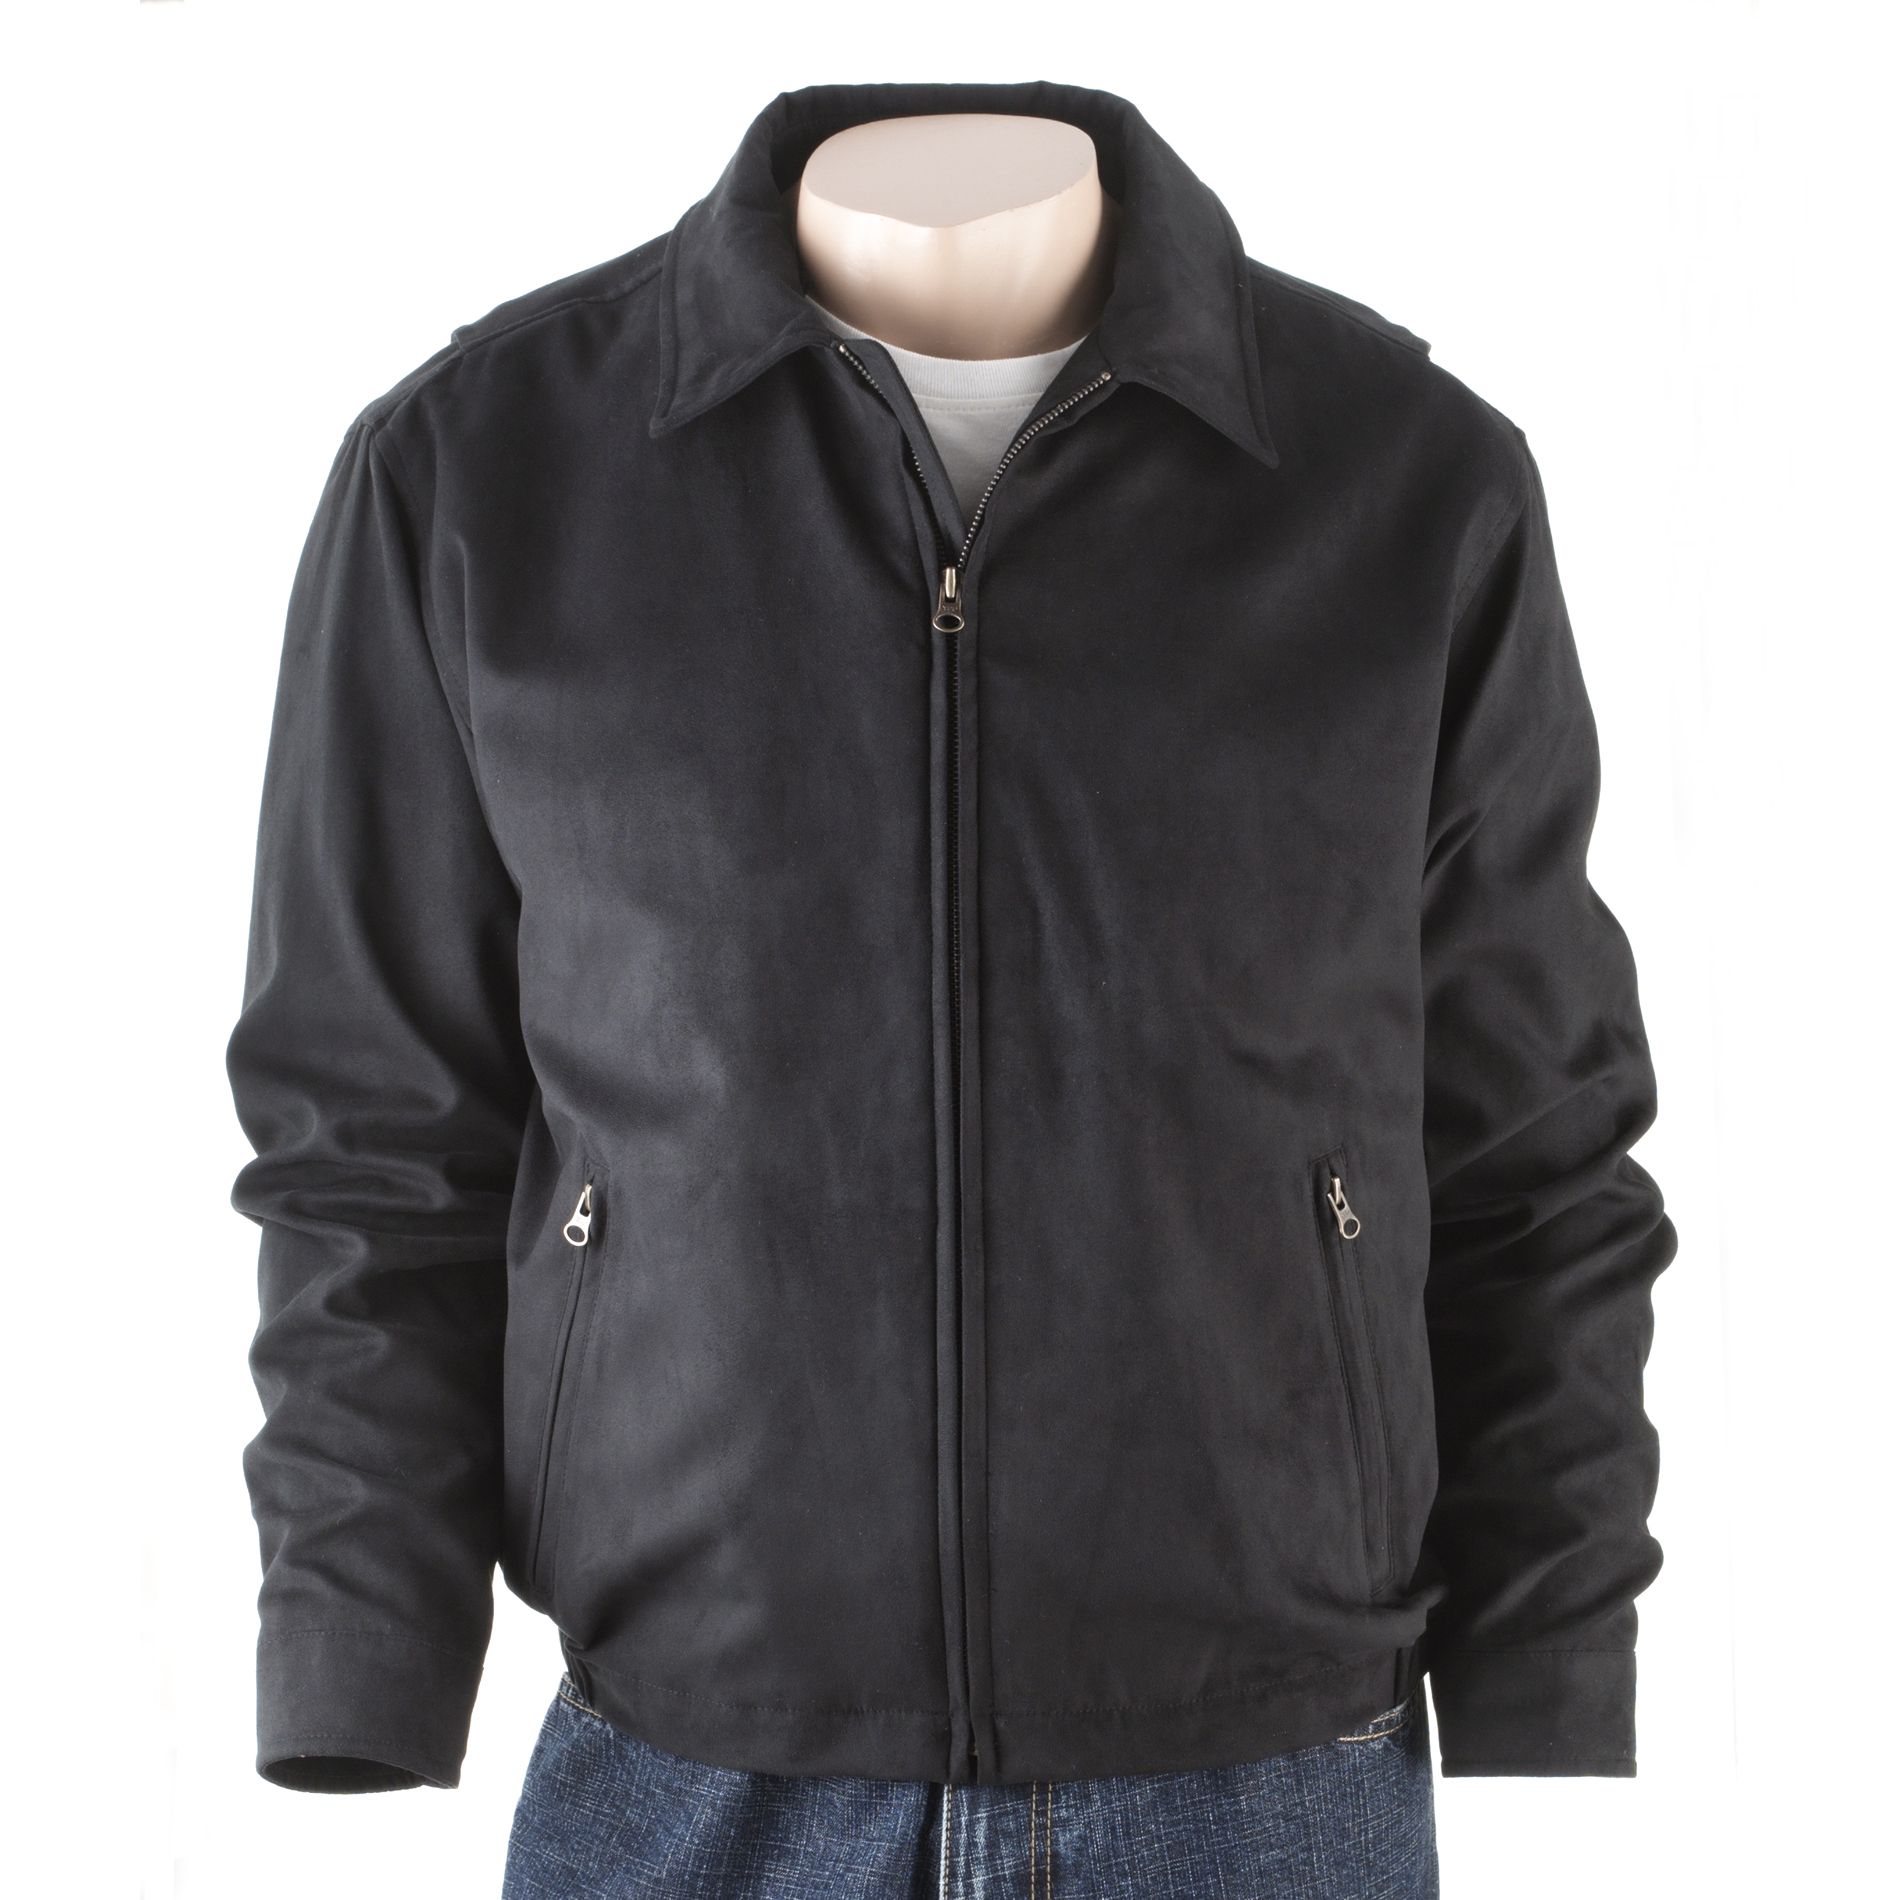 Covington Light Weight Microsuede Jacket